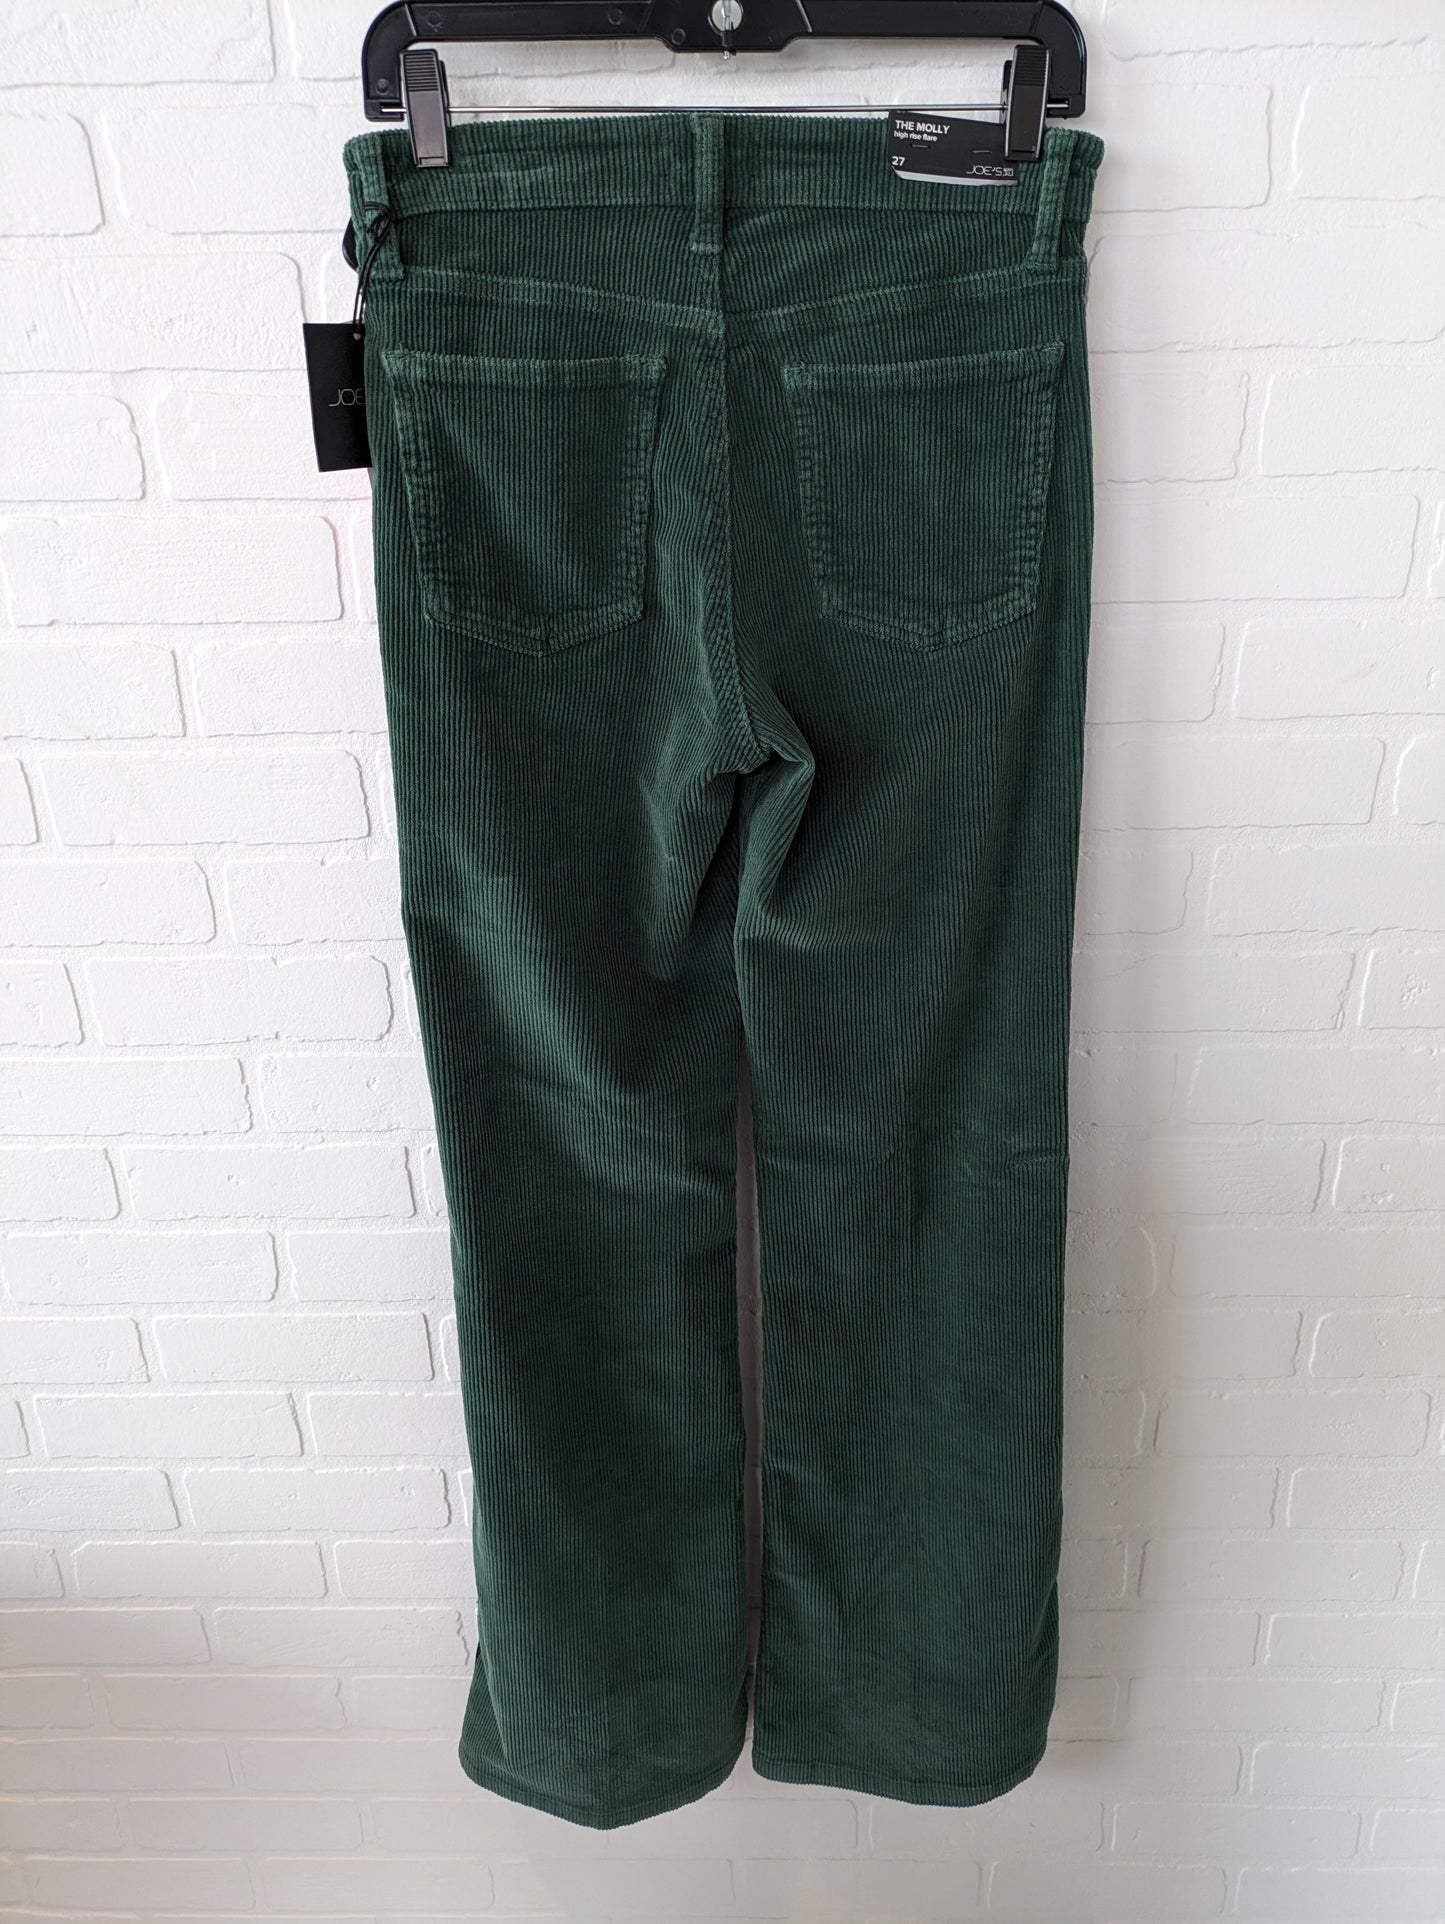 Pants Corduroy By Joes Jeans  Size: 4